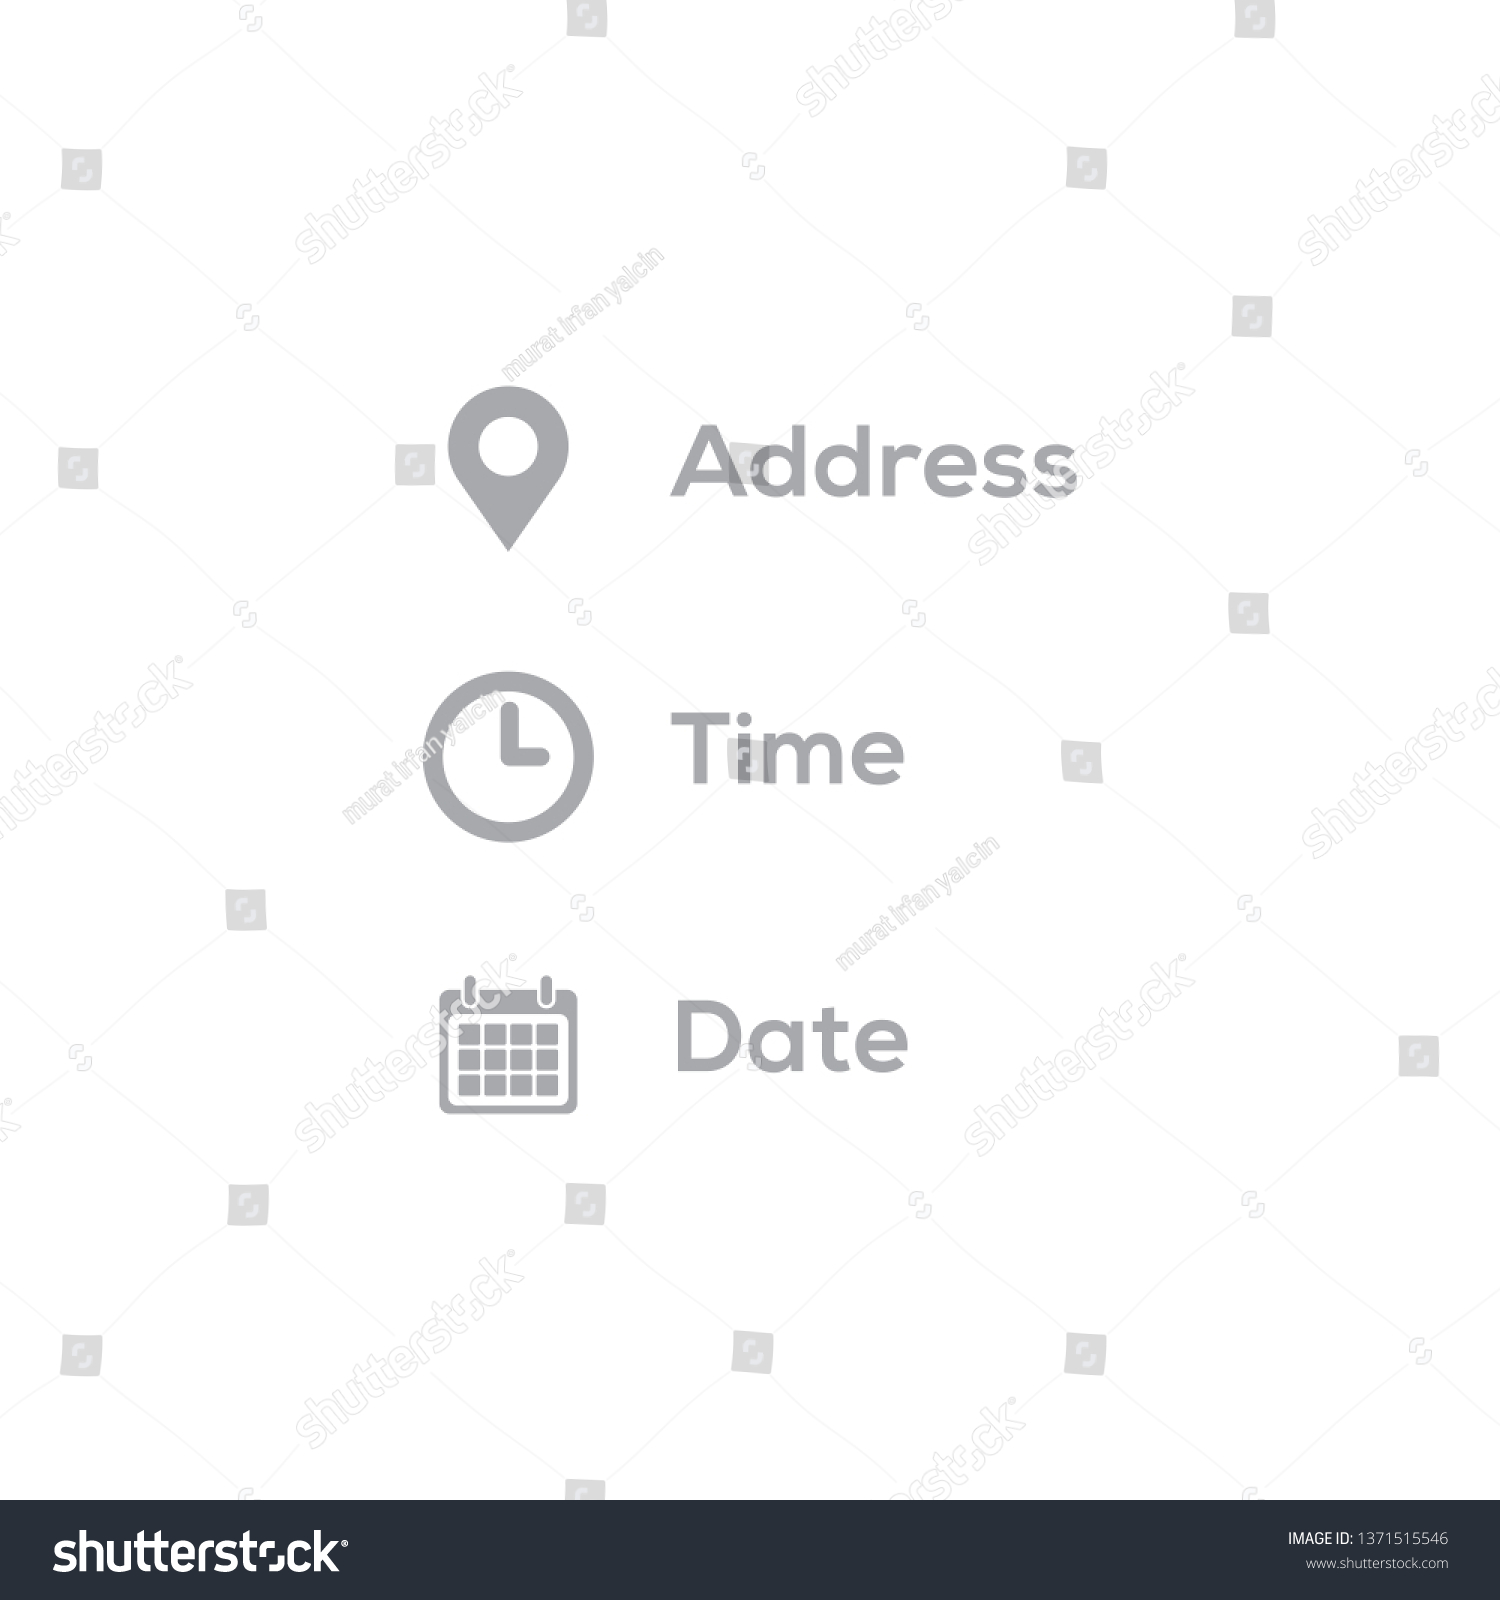 Address, date, time icons vector illustration #1371515546